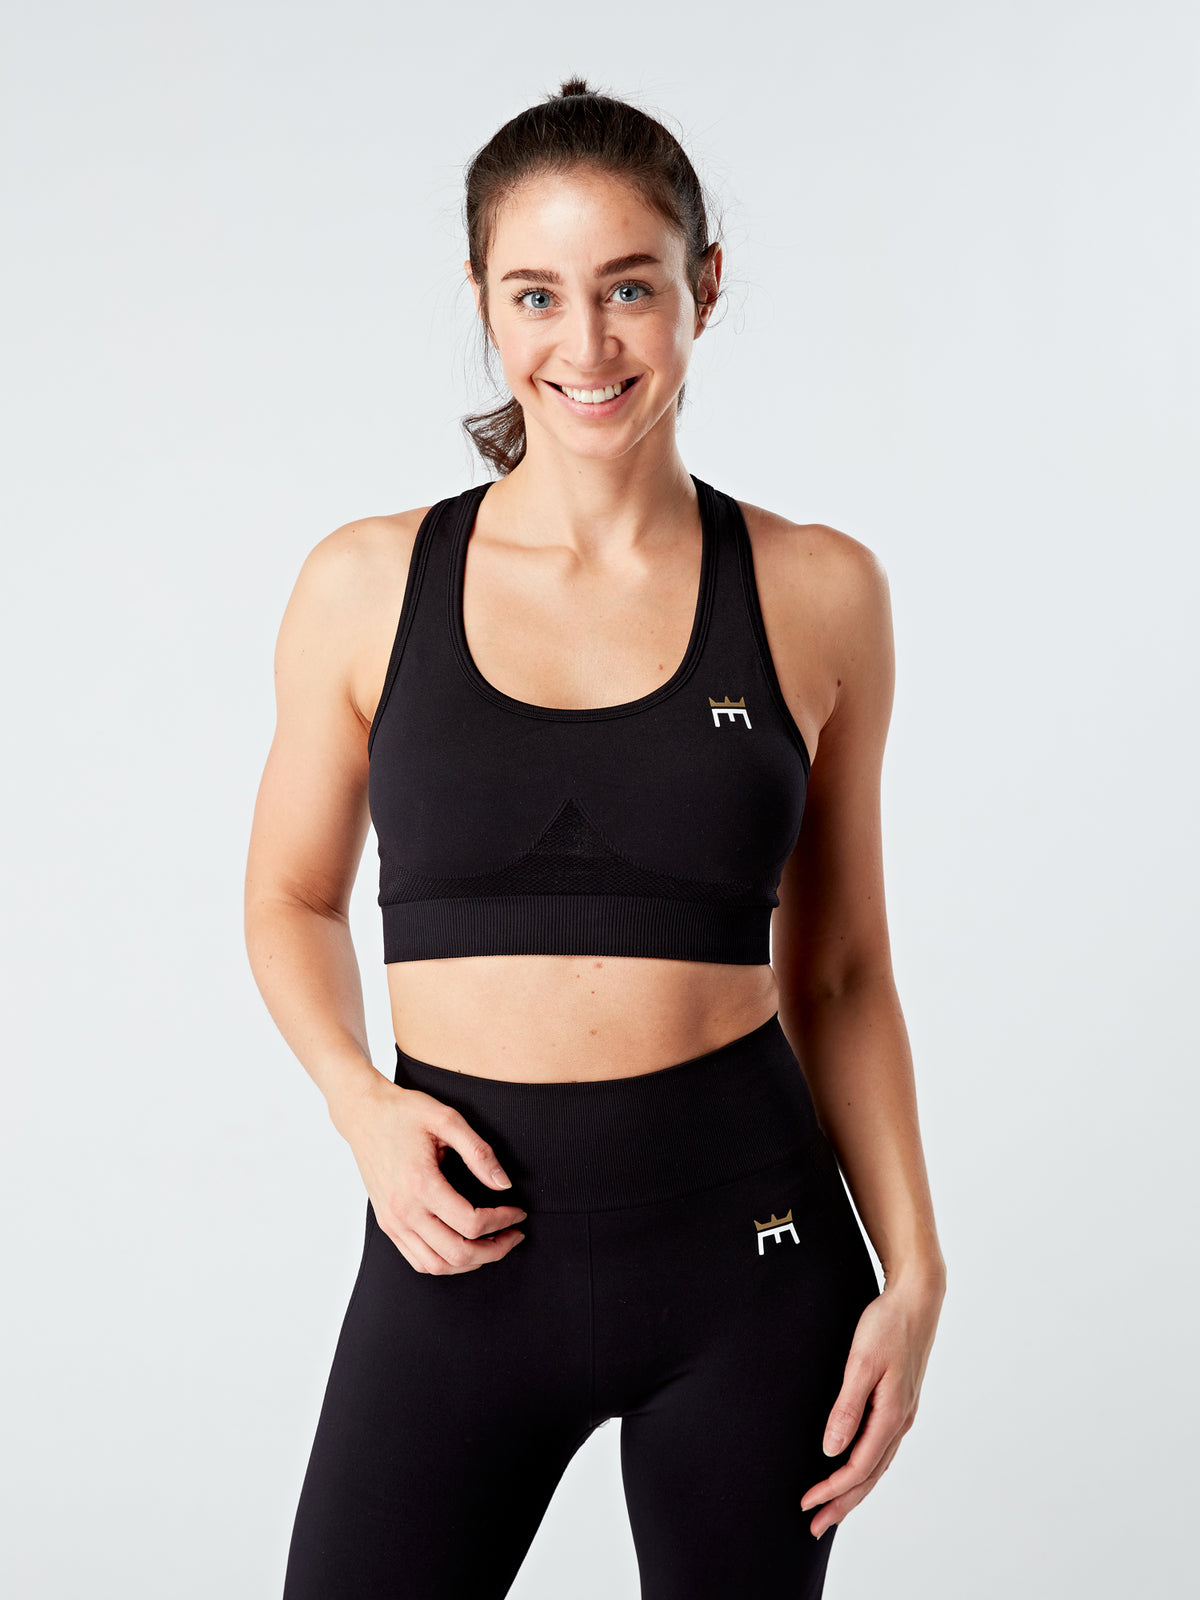 Alt=“ incredible support for all things high impact, yet comfortable and stylish for lounge and athleisure Sweat wicking and fast drying High support Seamless Buttery soft fabric that sits nicely on the skin”